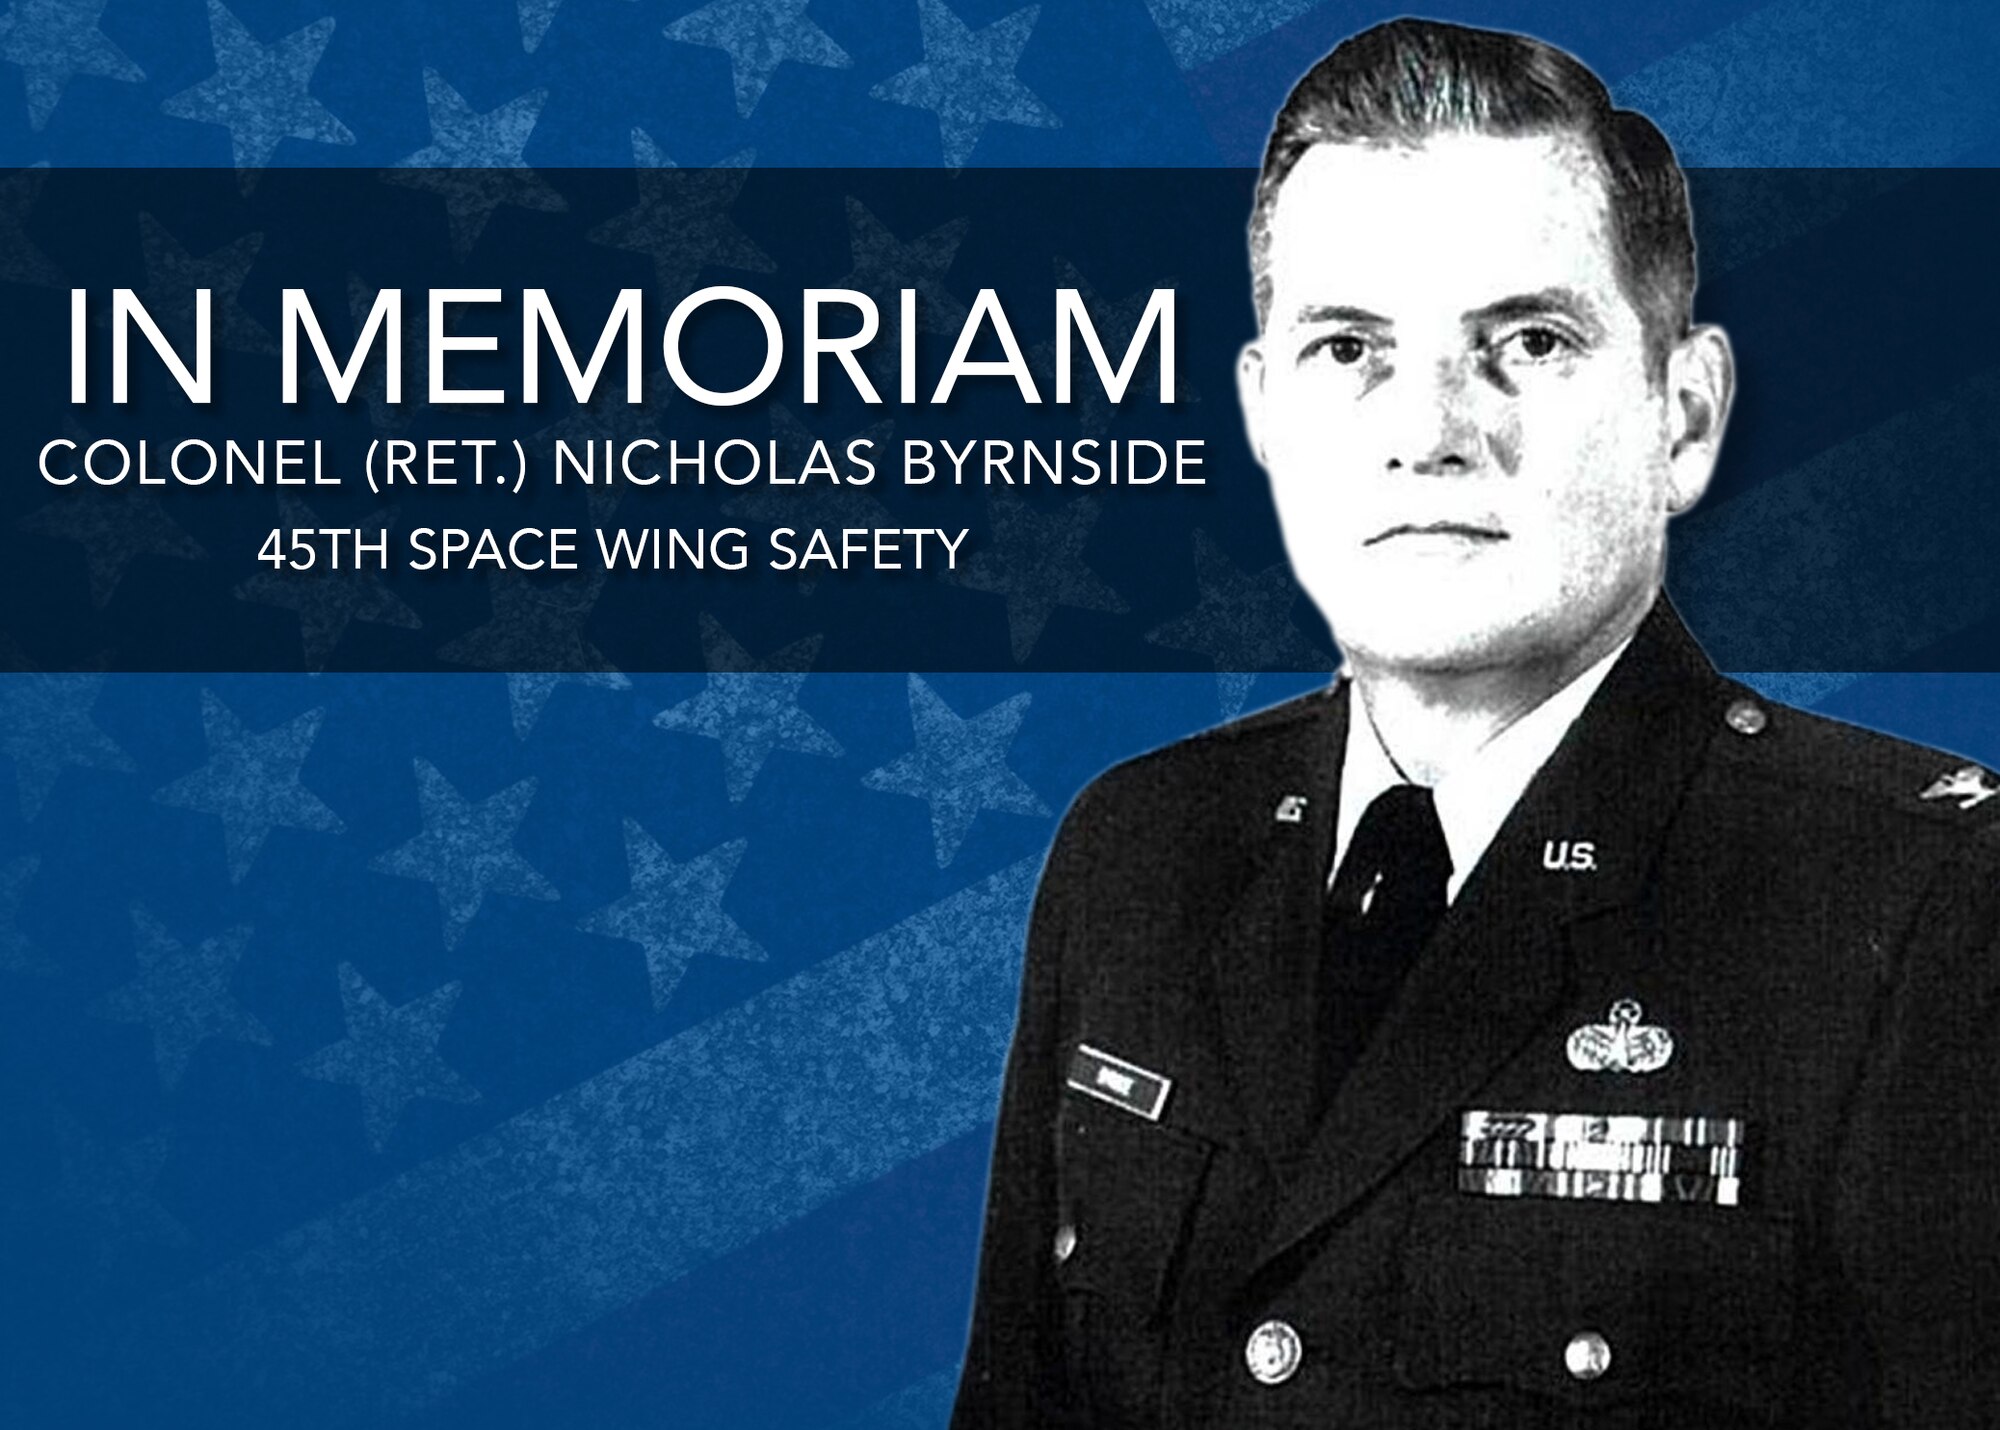 The flag will be flown at half-staff Friday, March 30th in honor of Mr. Nicholas C. Byrnside, Chief, Safety Analysis, who passed away on March 19. He was 78 years old. For more than 50 years, Mr. Byrnside proudly served and supported the United States Navy and United States Air Force, where he had a tremendous impact on the United States space program. (U.S. Air Force illustration by SSgt. Christopher Stoltz)